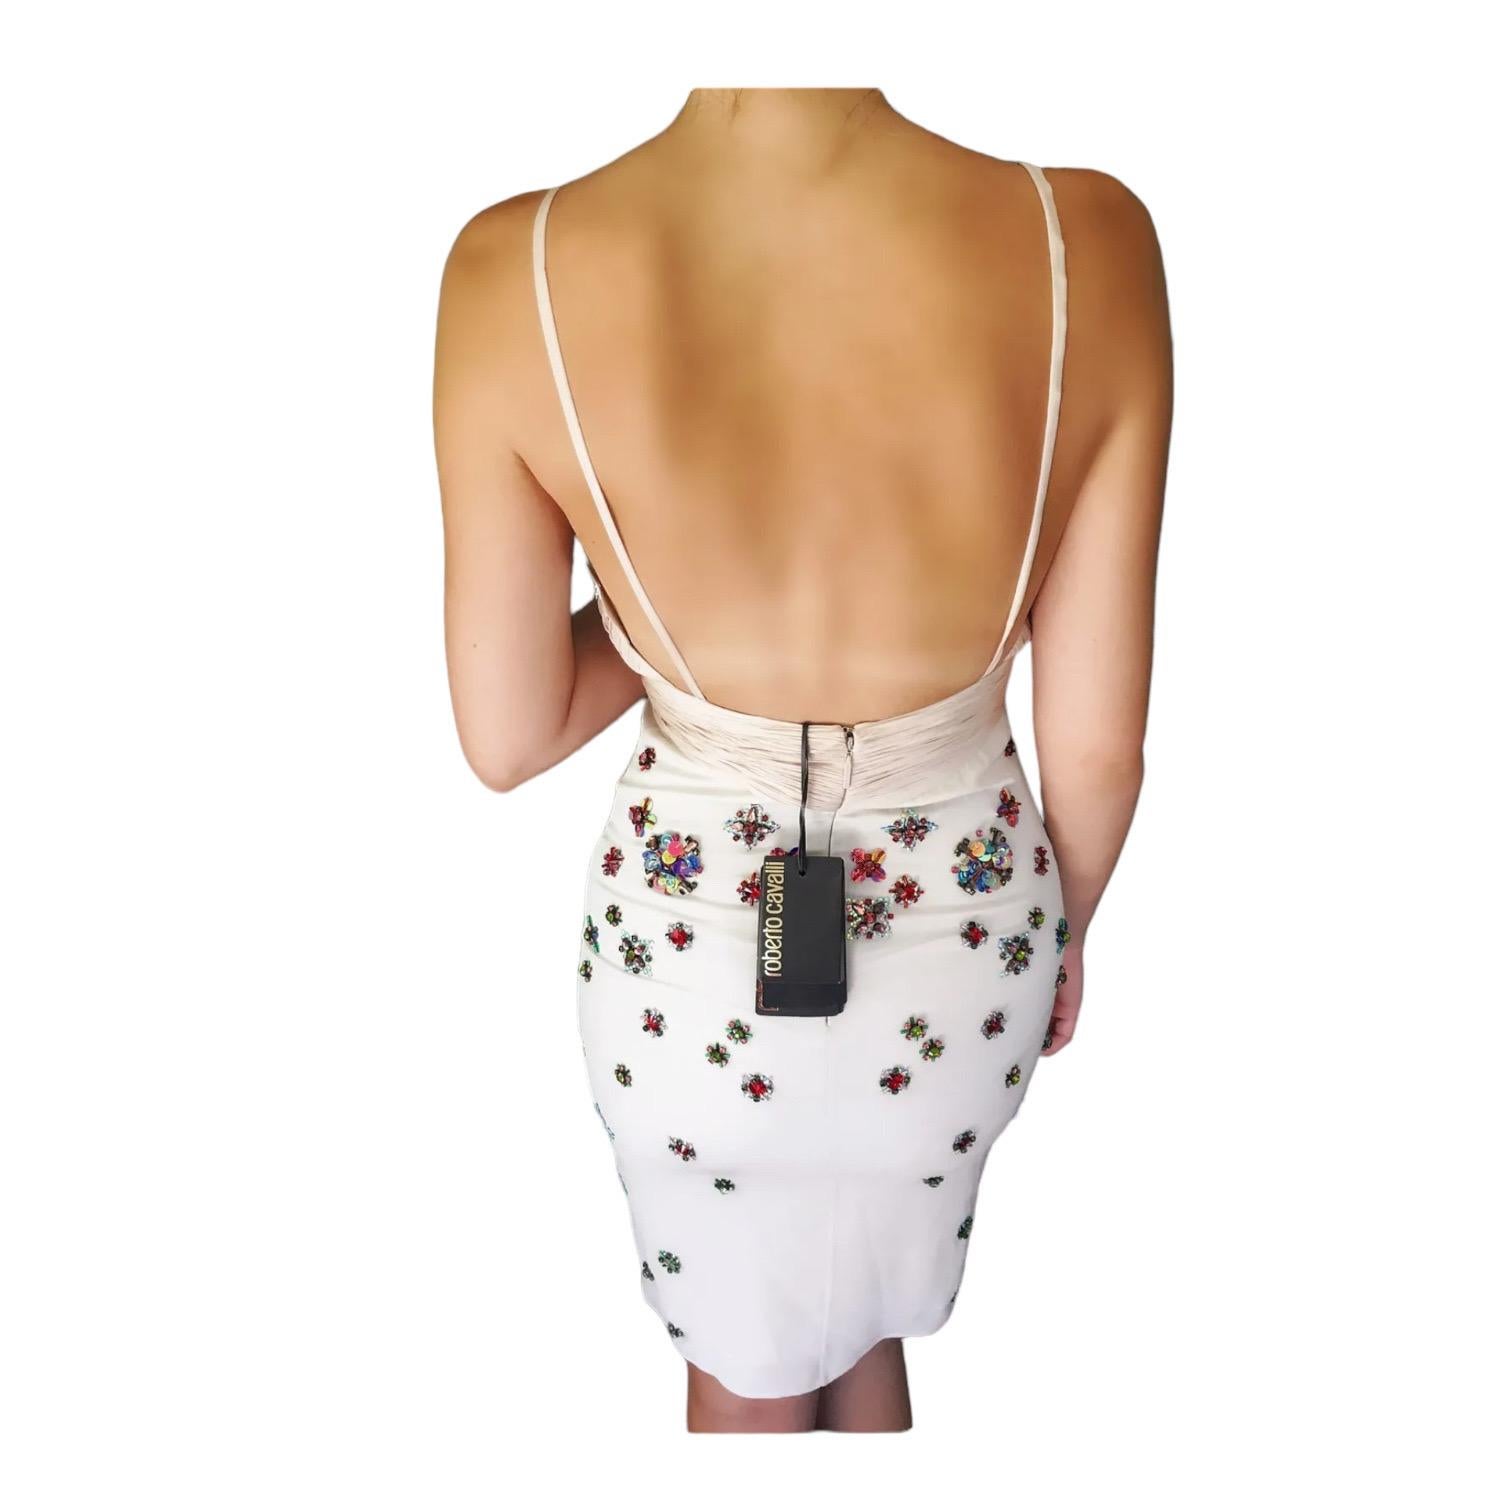 Roberto Cavalli Unworn c. 2012 Floral Embellished Plunging Open Back Dress In New Condition For Sale In Naples, FL